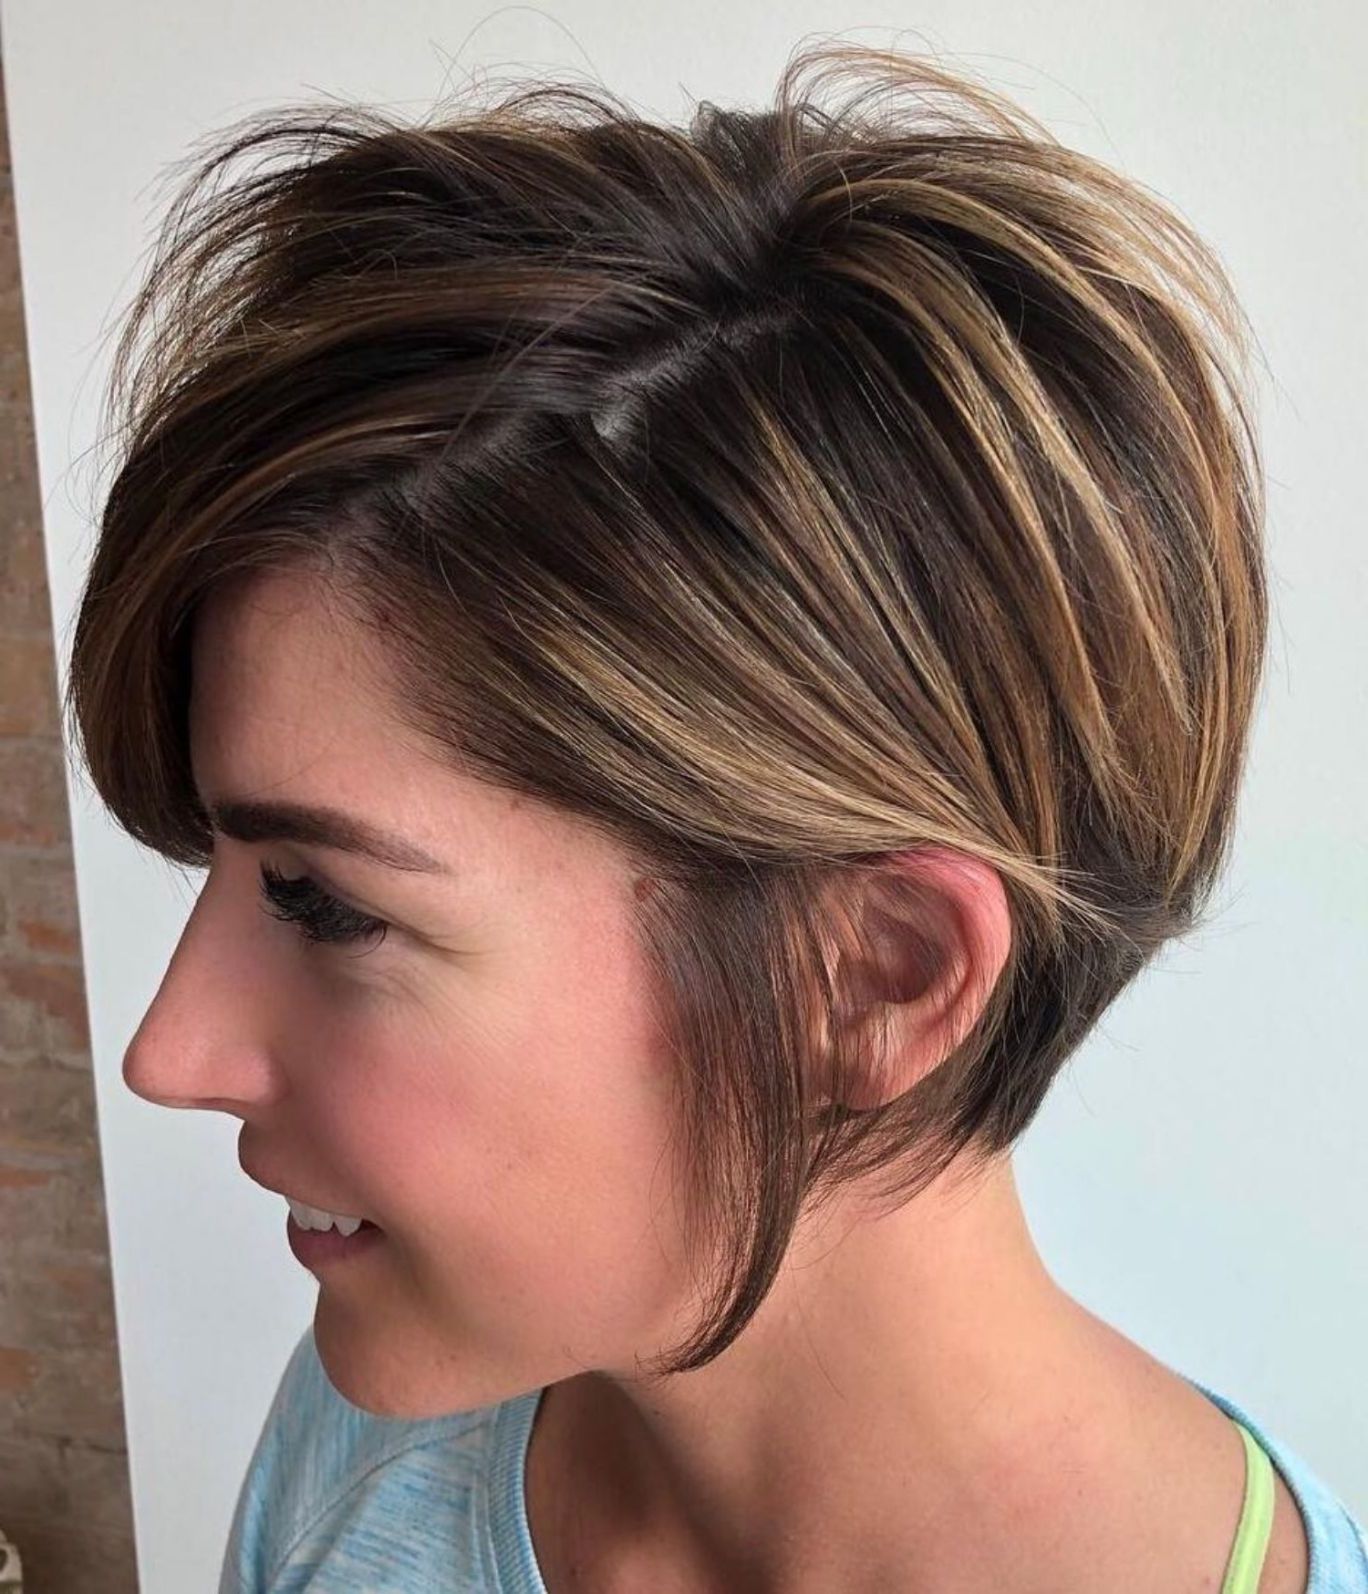 100 Mind Blowing Short Hairstyles For Fine Hair | Hair | Pinterest With Most Current Platinum Blonde Disheveled Pixie Haircuts (View 13 of 15)